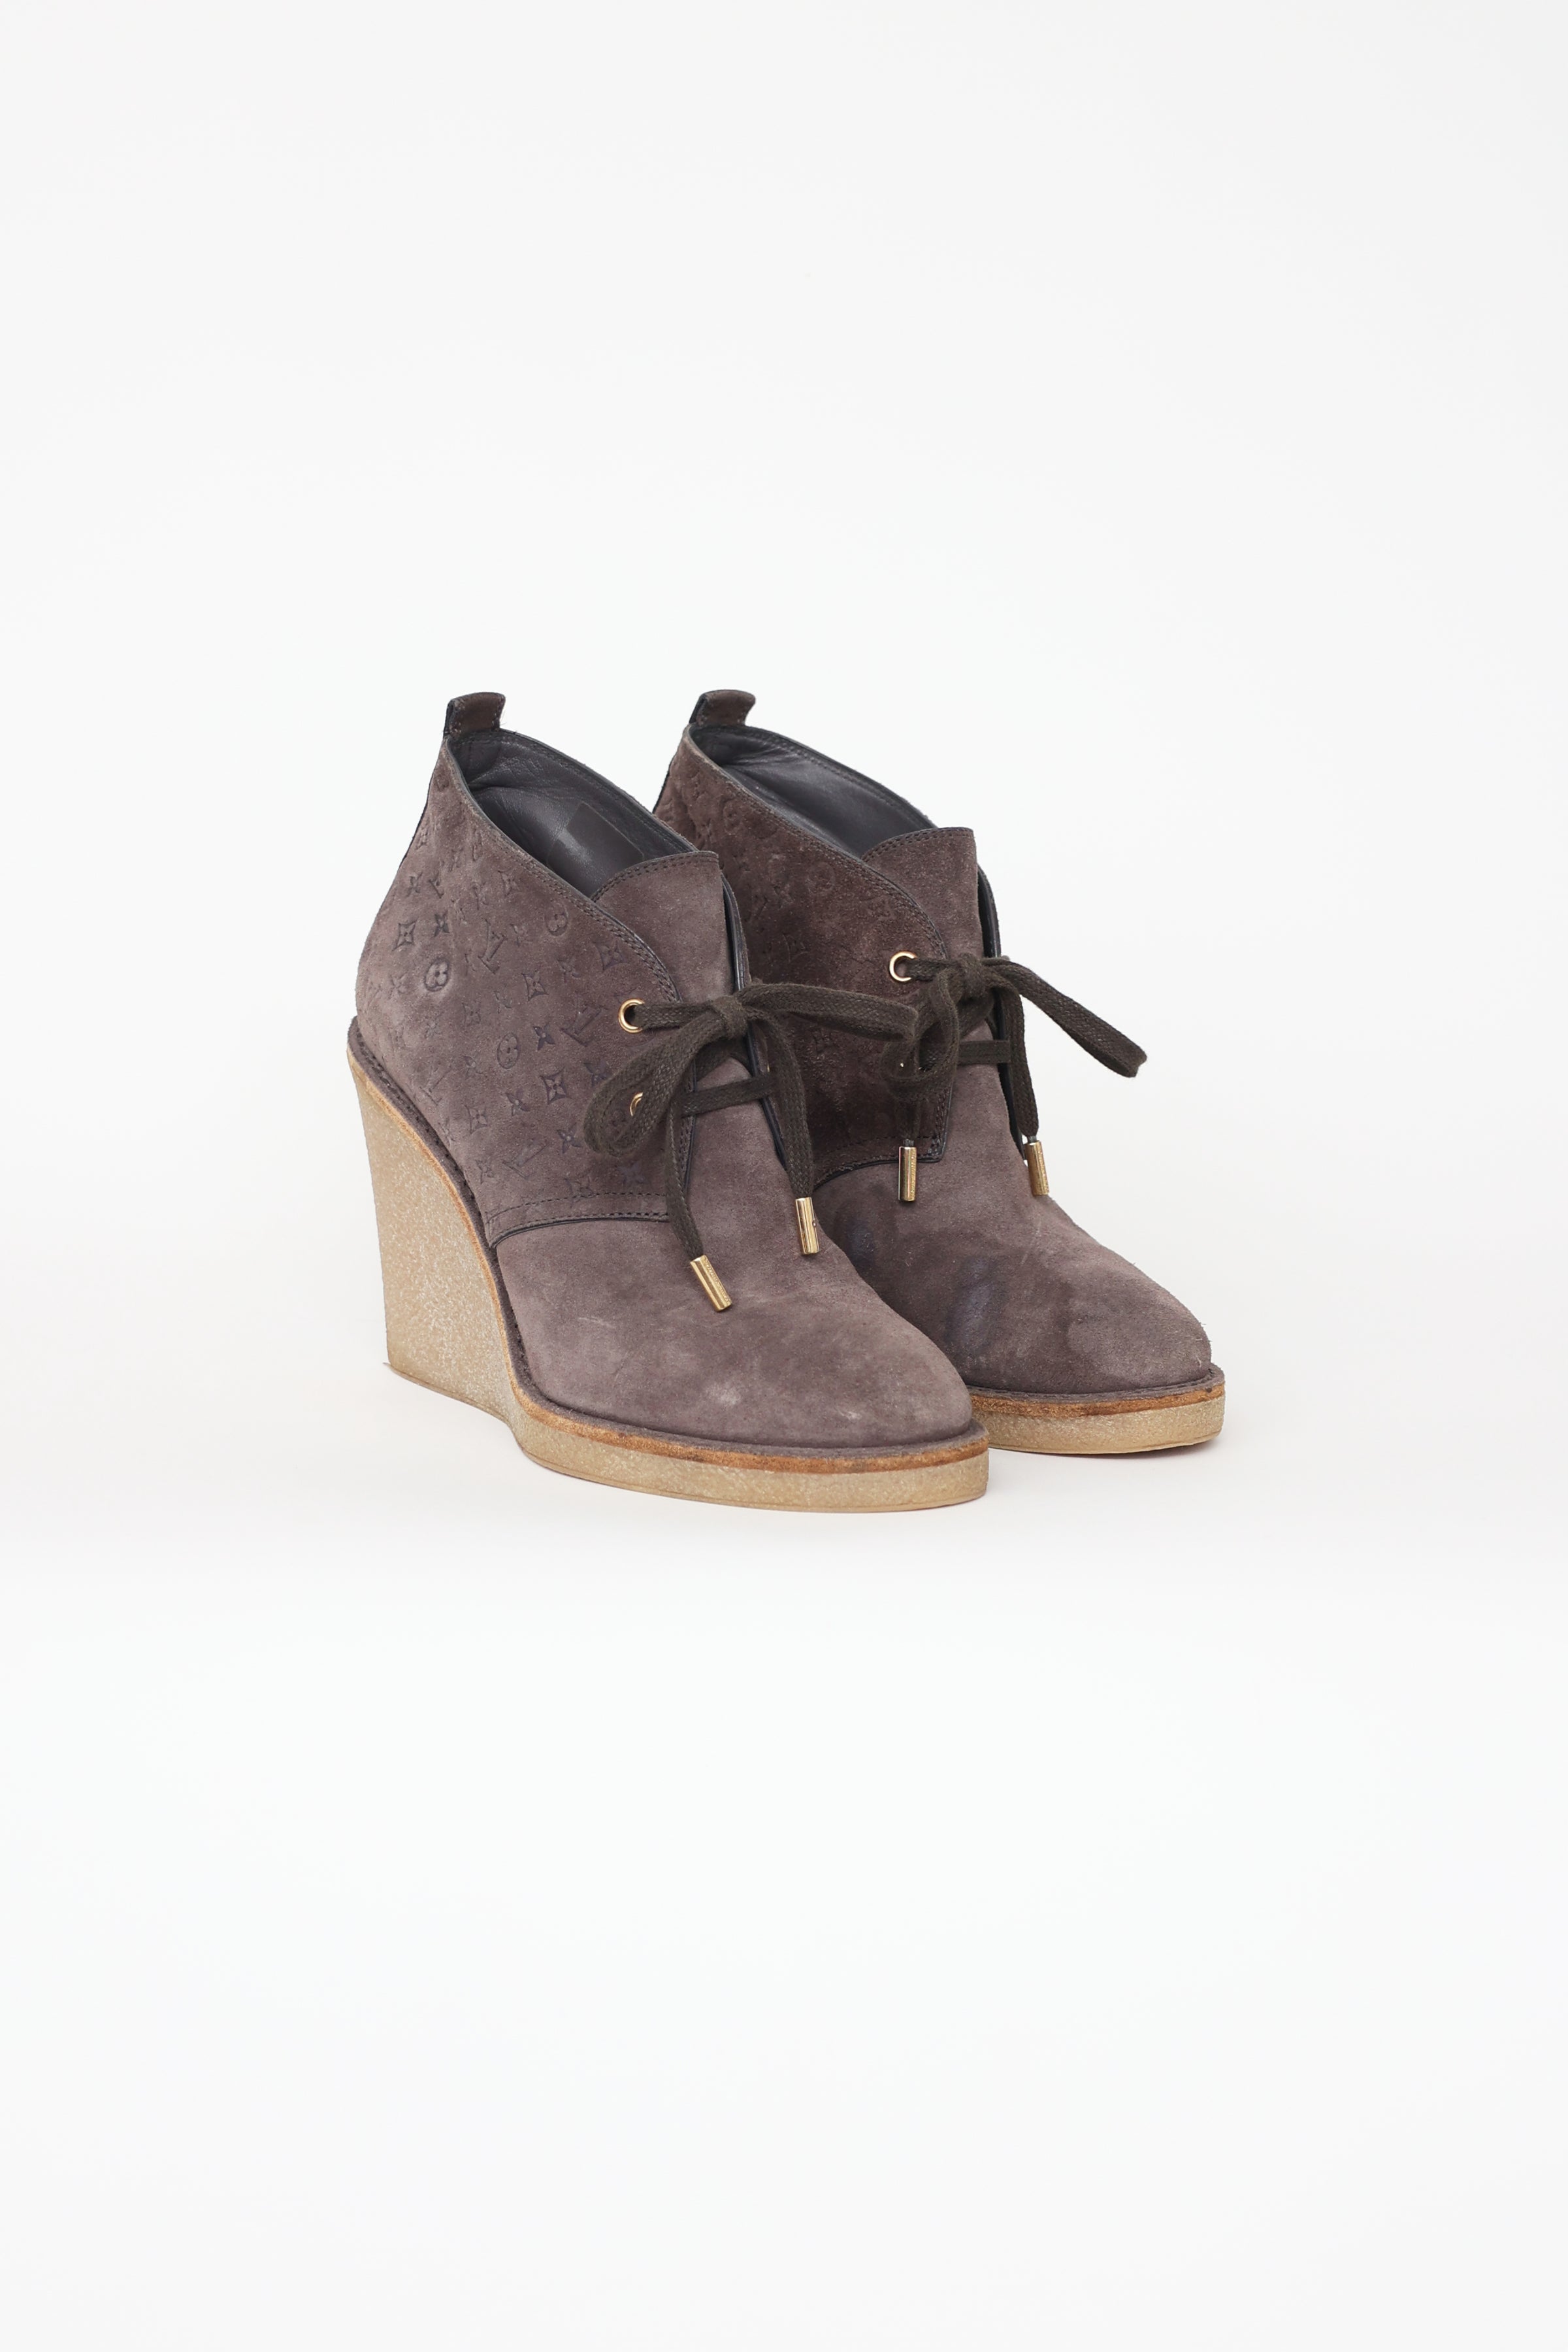 Louis Vuitton // Grey Suede Wedge Boots – VSP Consignment